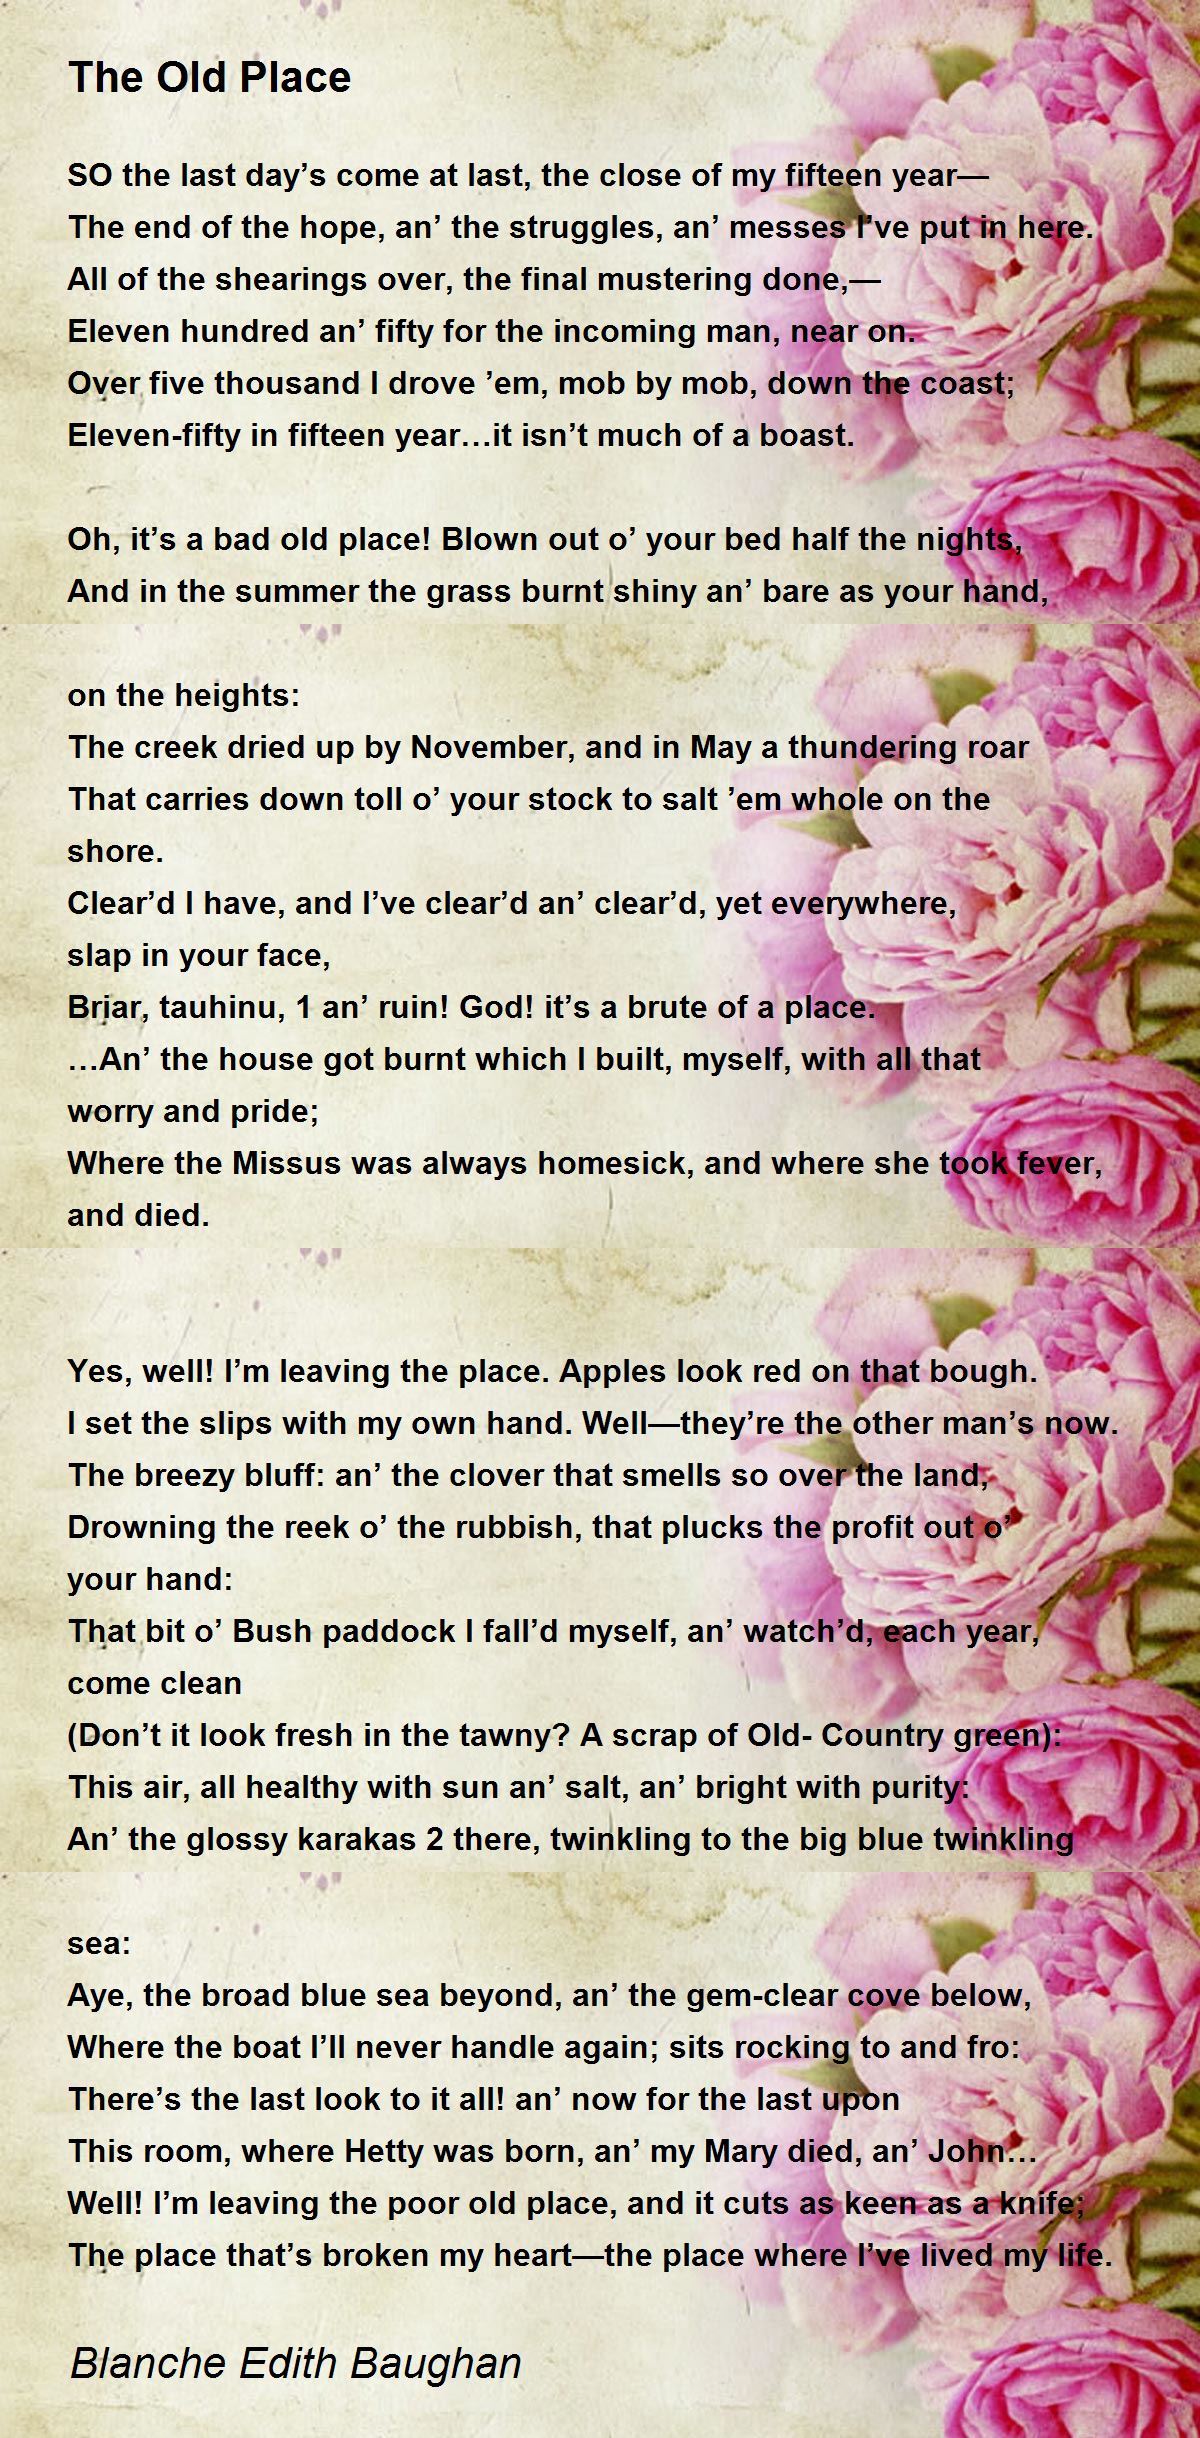 The Old Place - The Old Place Poem by Blanche Edith Baughan